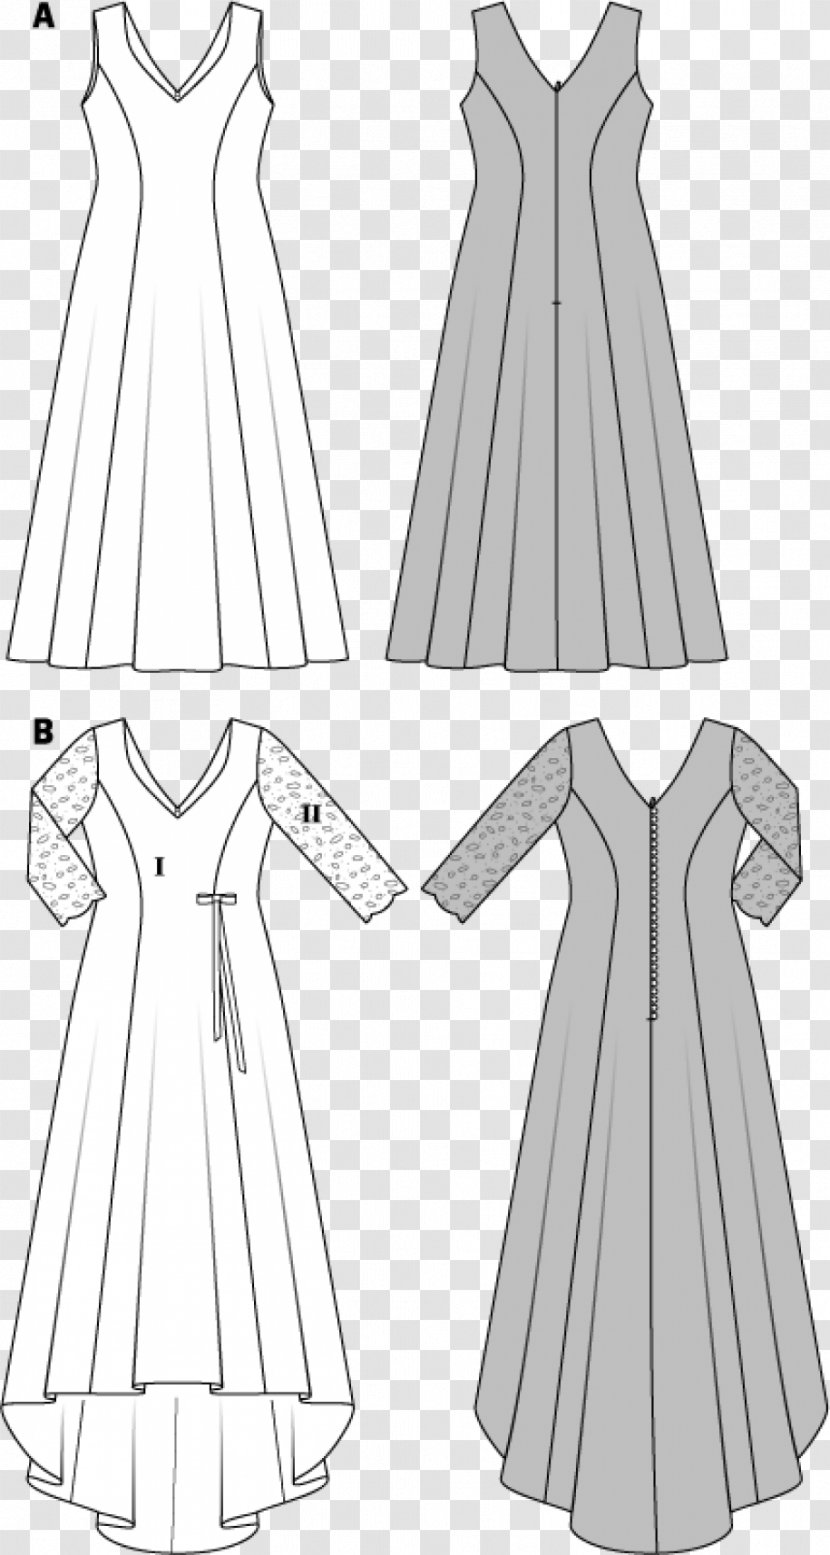 Burda Style Wedding Dress Evening Gown Pattern - Silhouette Transparent PNG